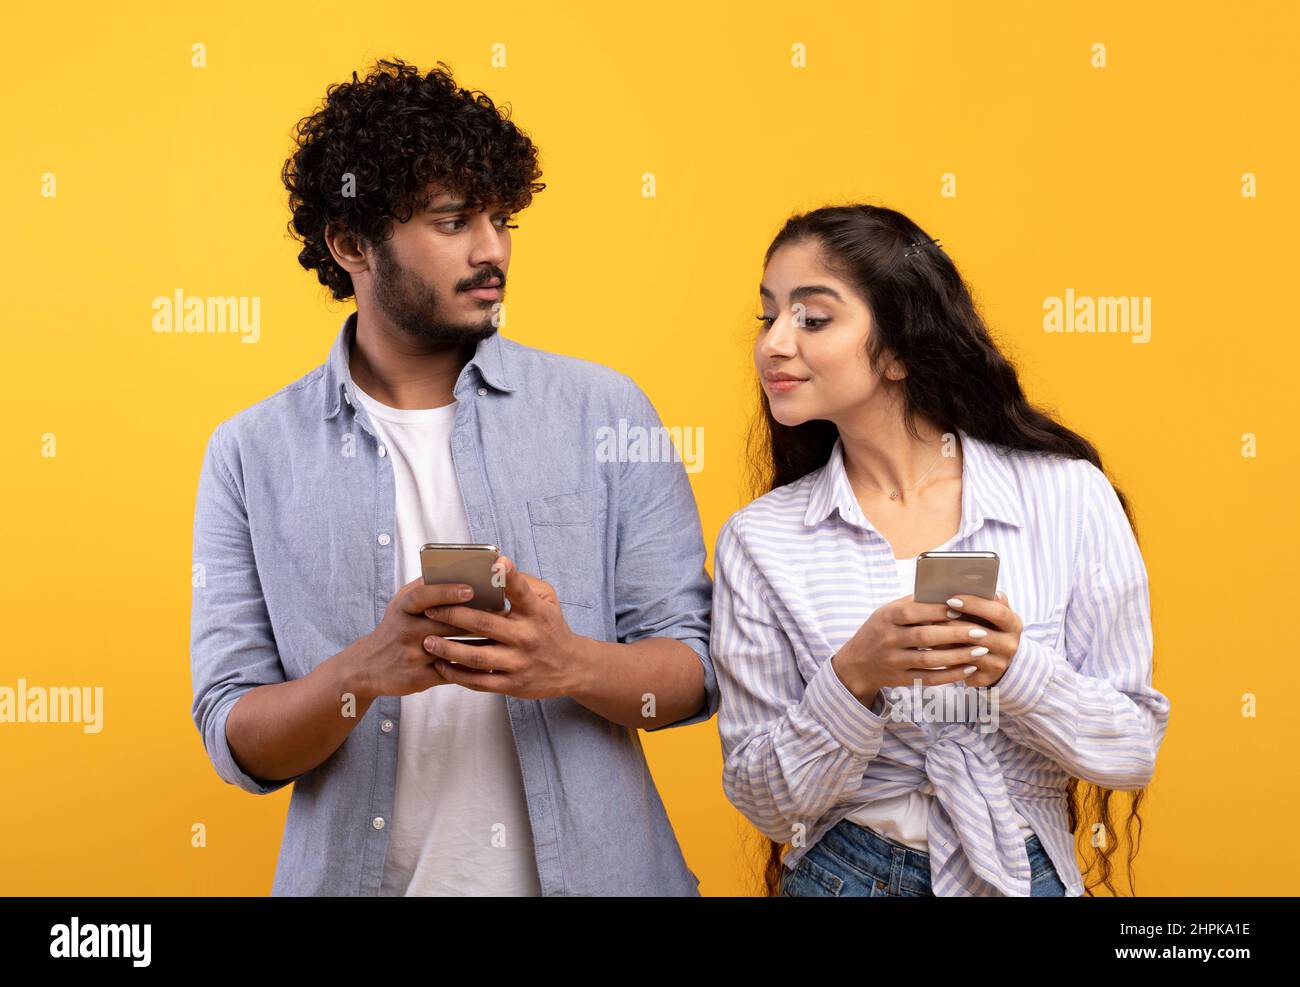 Shocked indian woman spying on her boyfriend using smartphone, texting sms or scrolling social media news feed Stock Photo